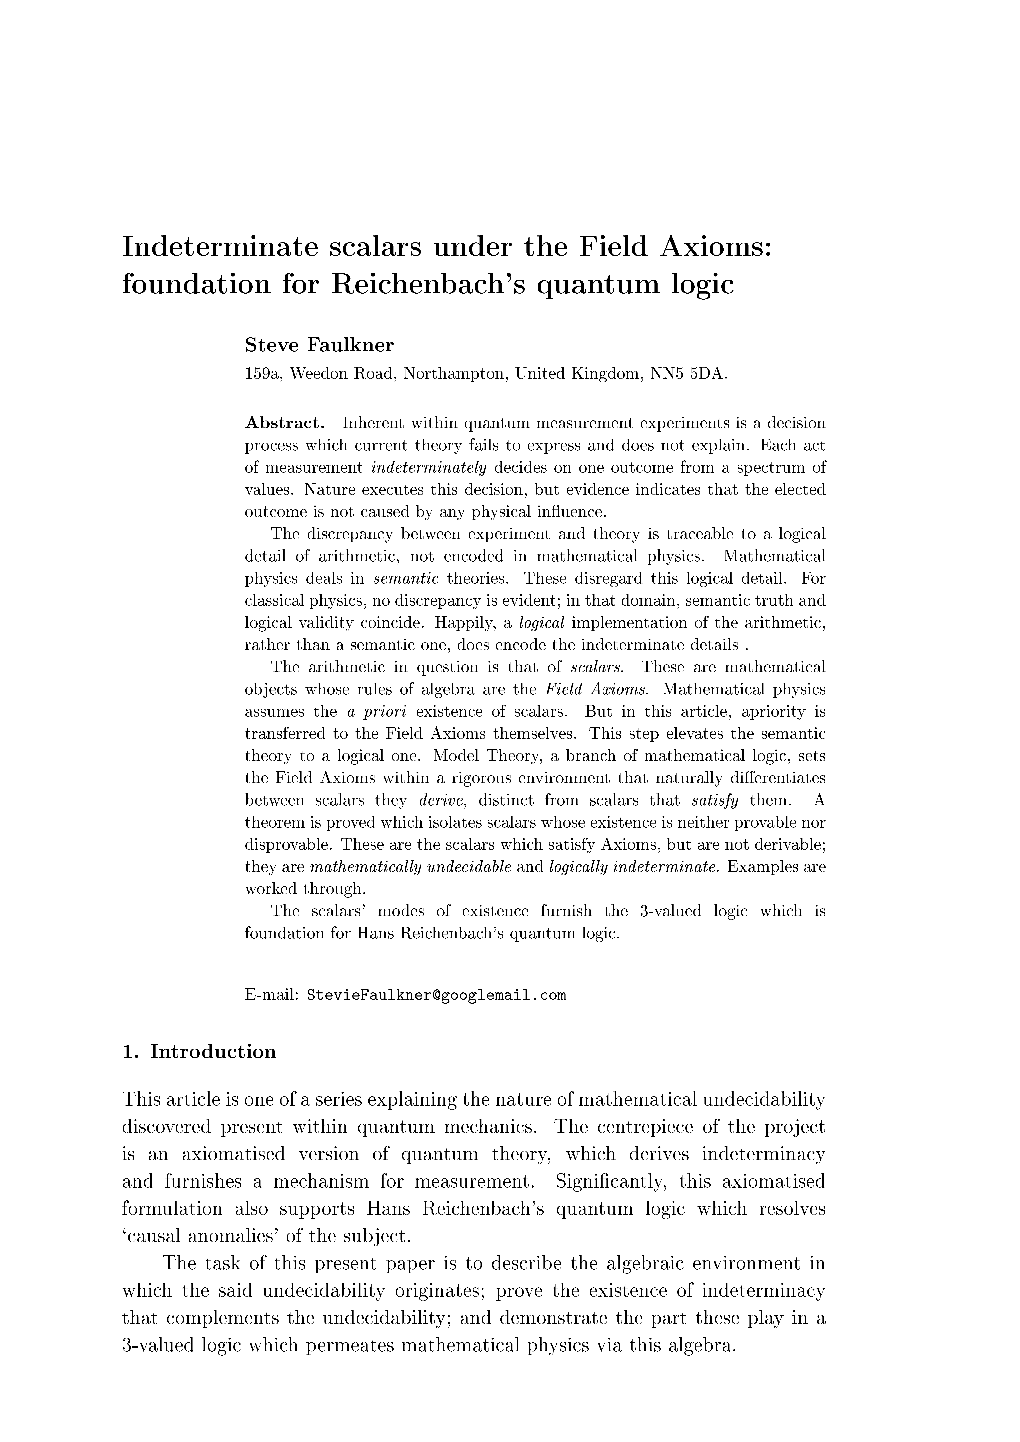 Indeterminate Scalars Under the Field Axioms: Foundation for Reichenbach's Quantum Logic